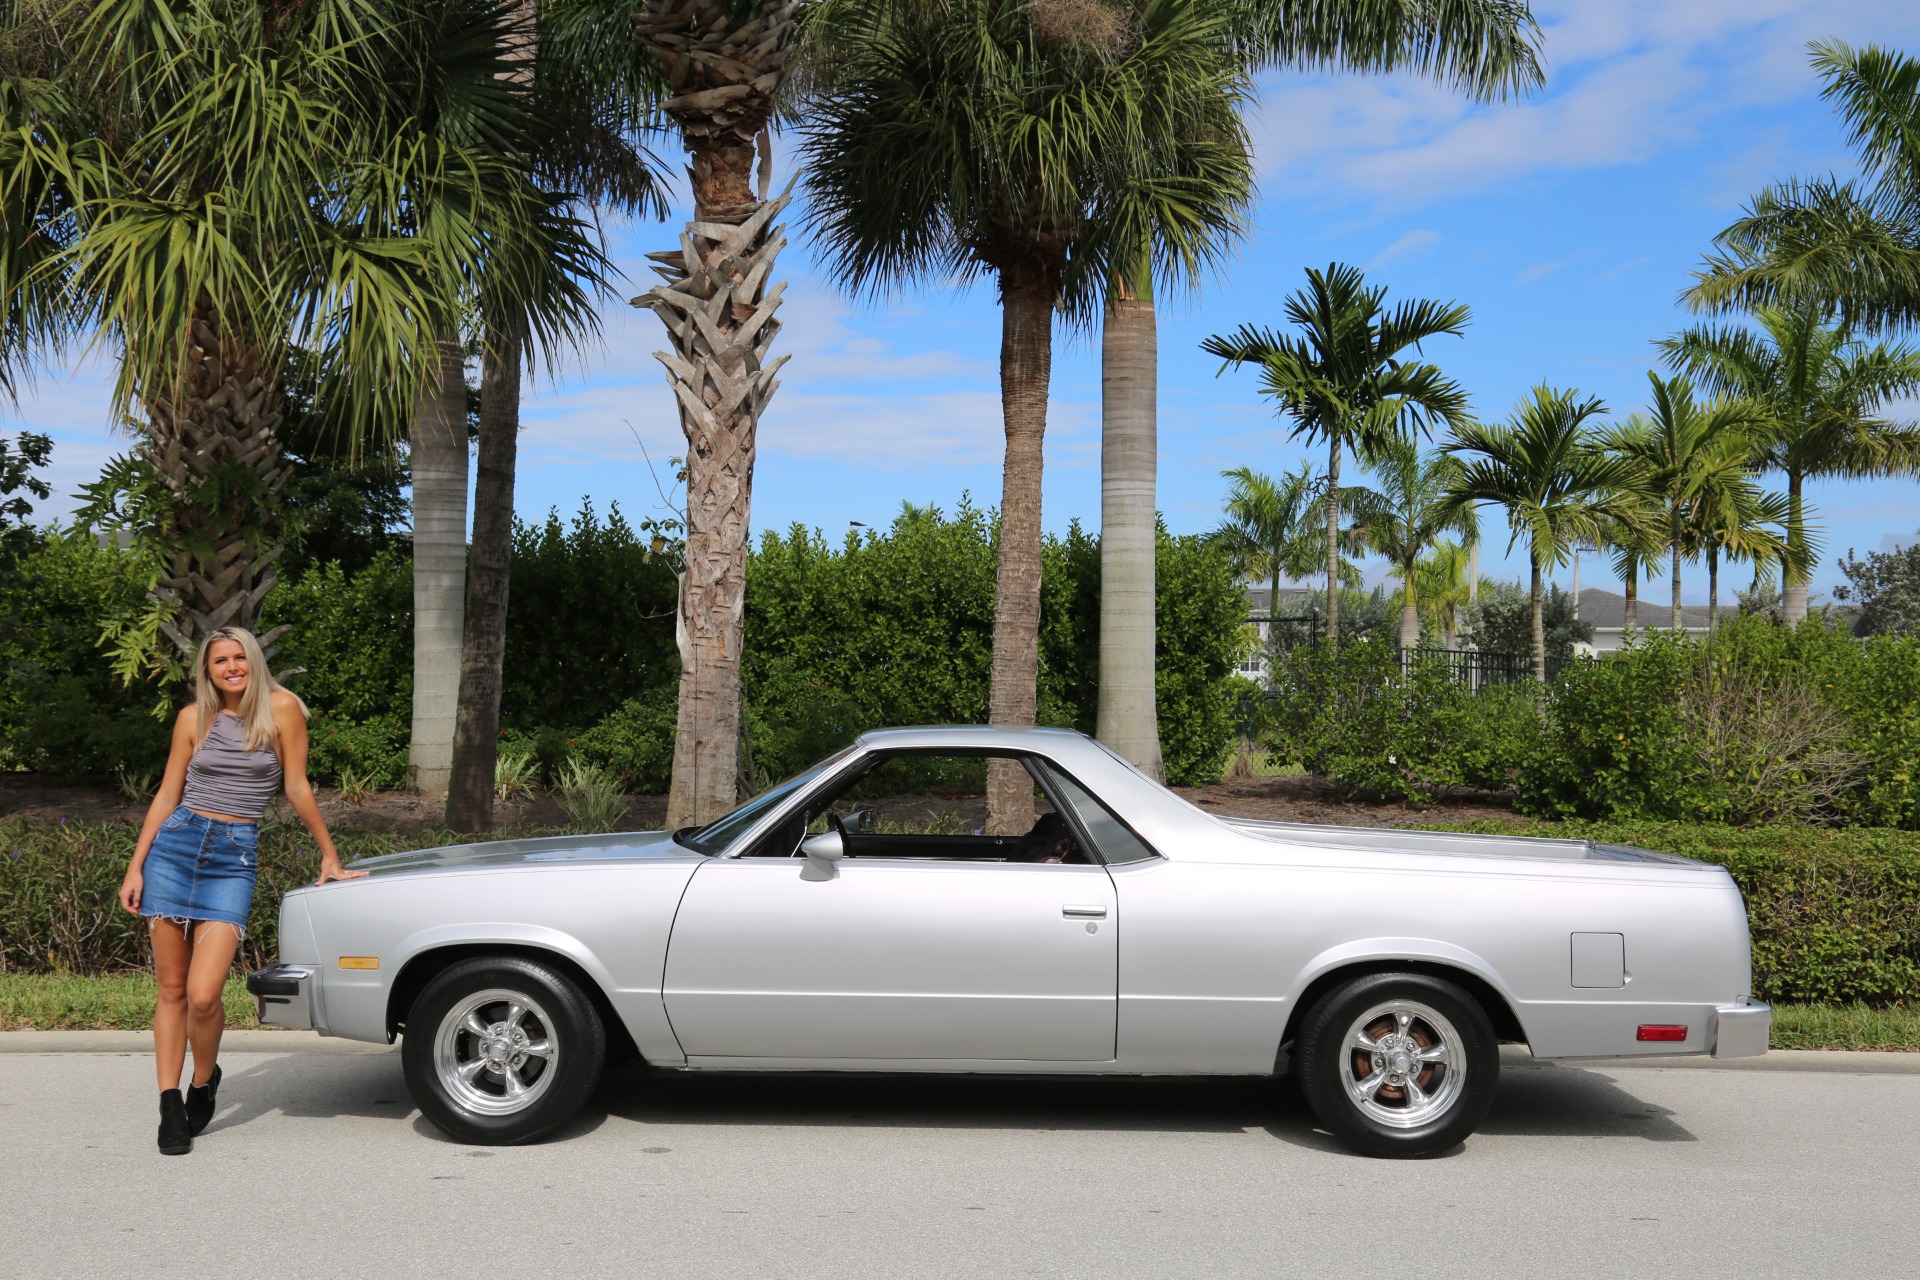 Used 1985 Chevrolet El Camino ss V8 Auto SS for sale Sold at Muscle Cars for Sale Inc. in Fort Myers FL 33912 2